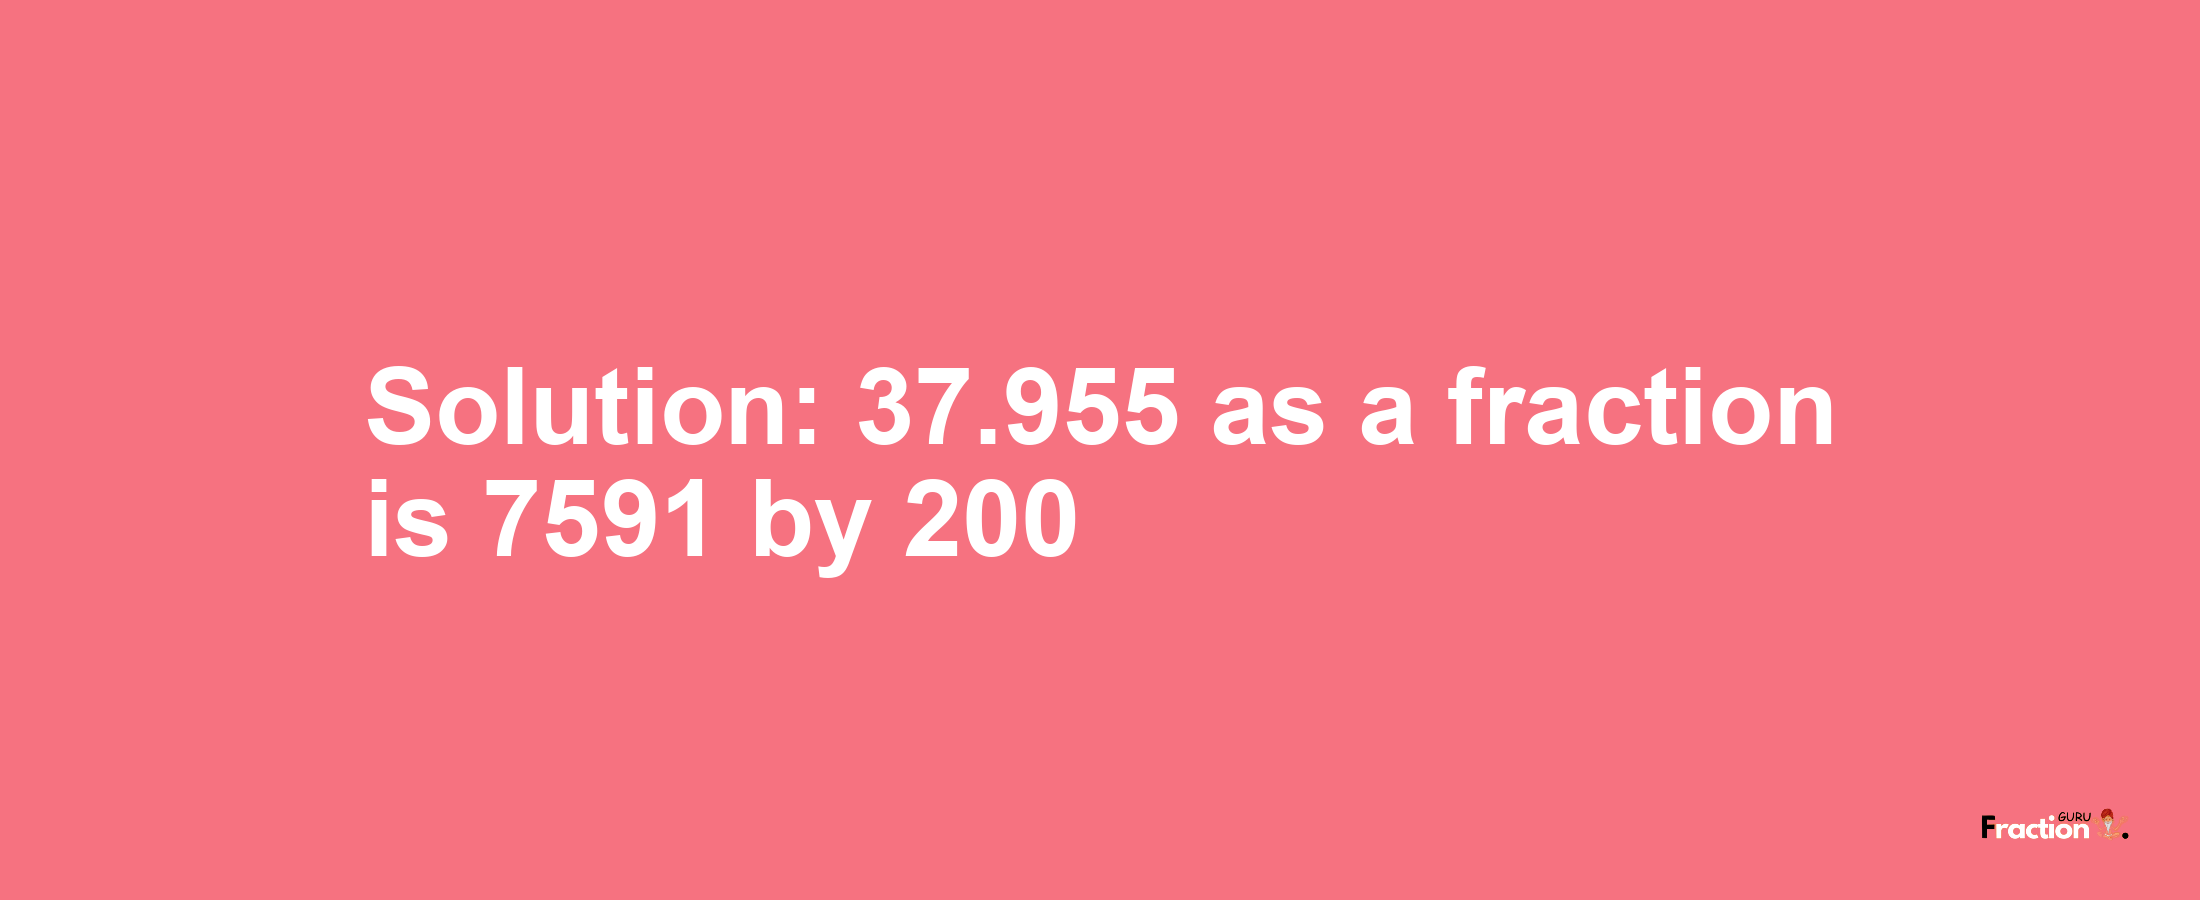 Solution:37.955 as a fraction is 7591/200